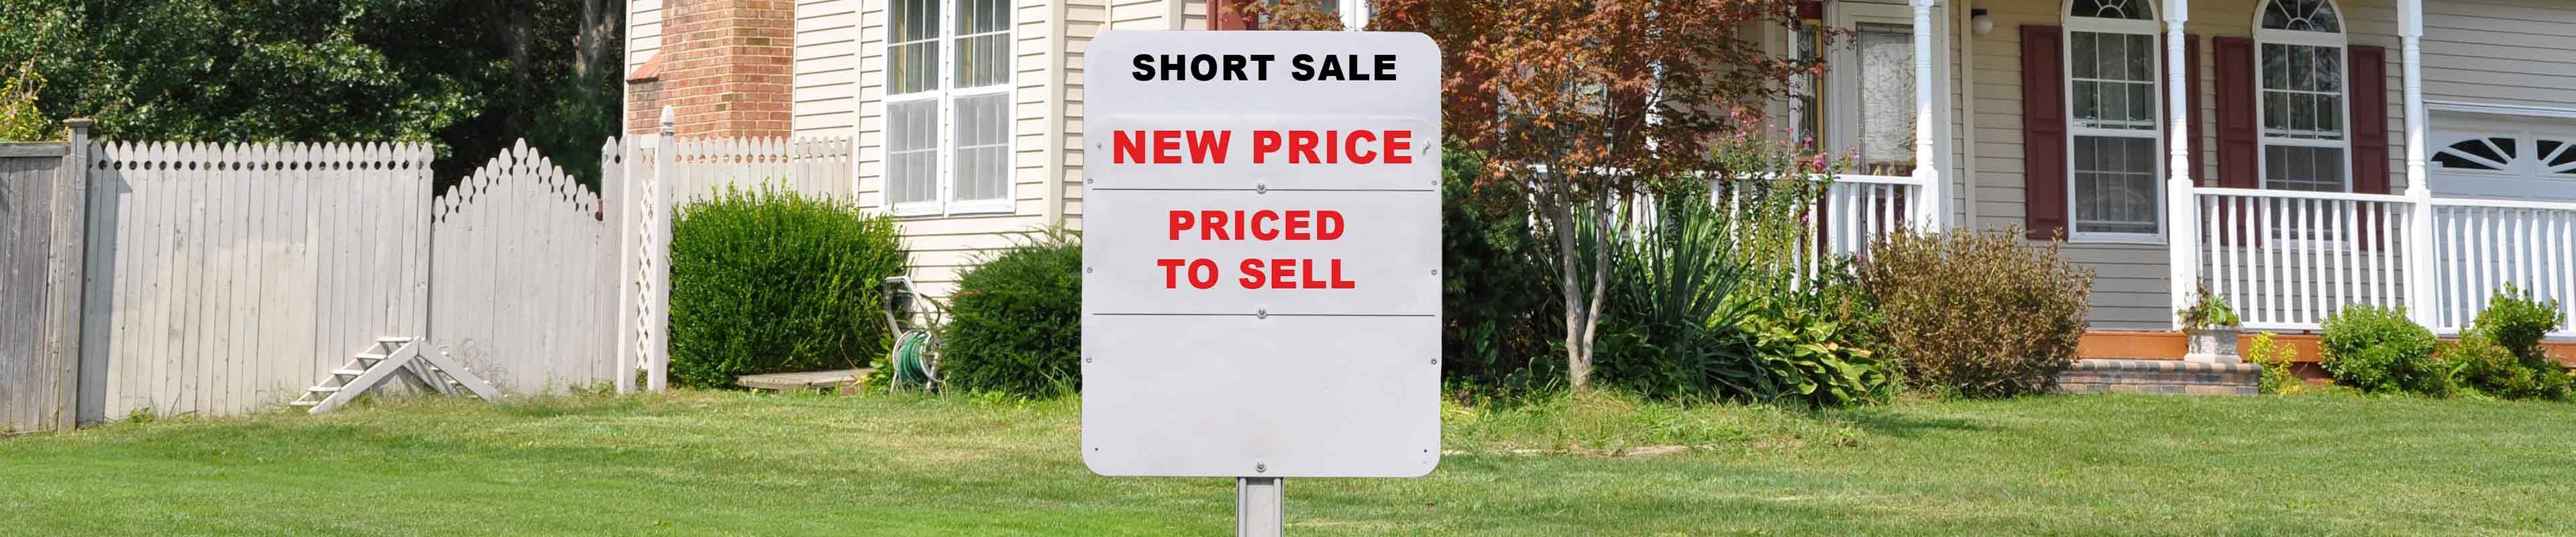 Image of a home with a short sale for sale sign.